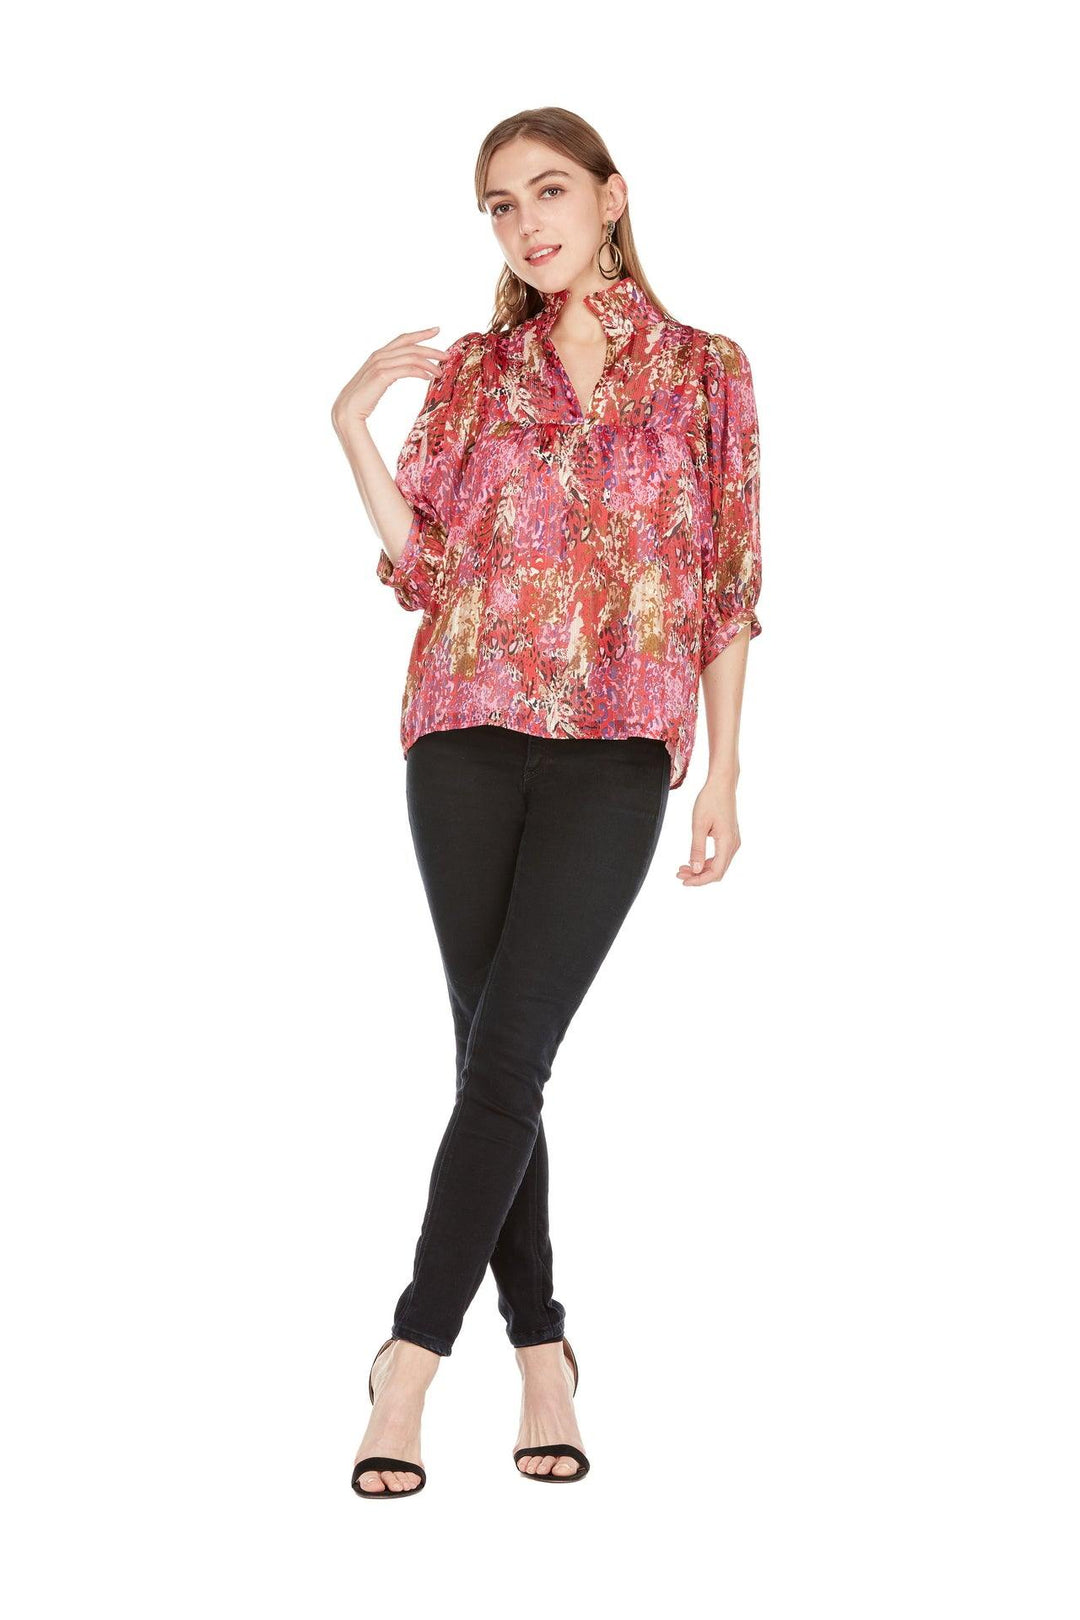 jade brand boutique puff sleeve fall colors tops and blouses online